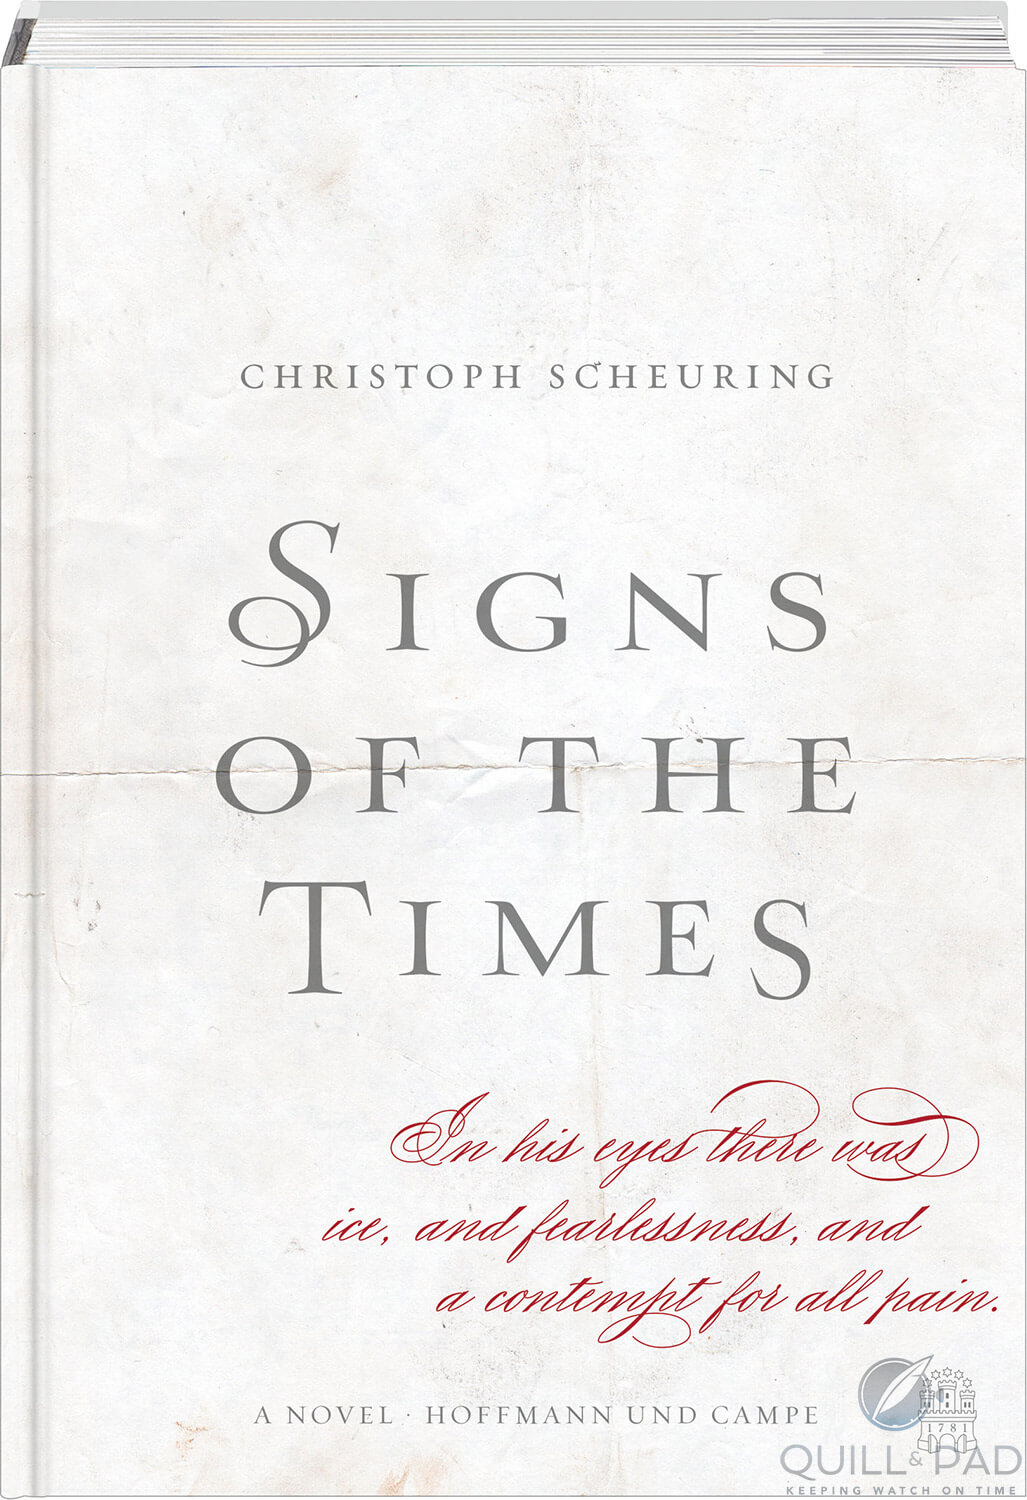 Cover of the historical novel 'Signs of the Times' by Christoph Scheuring